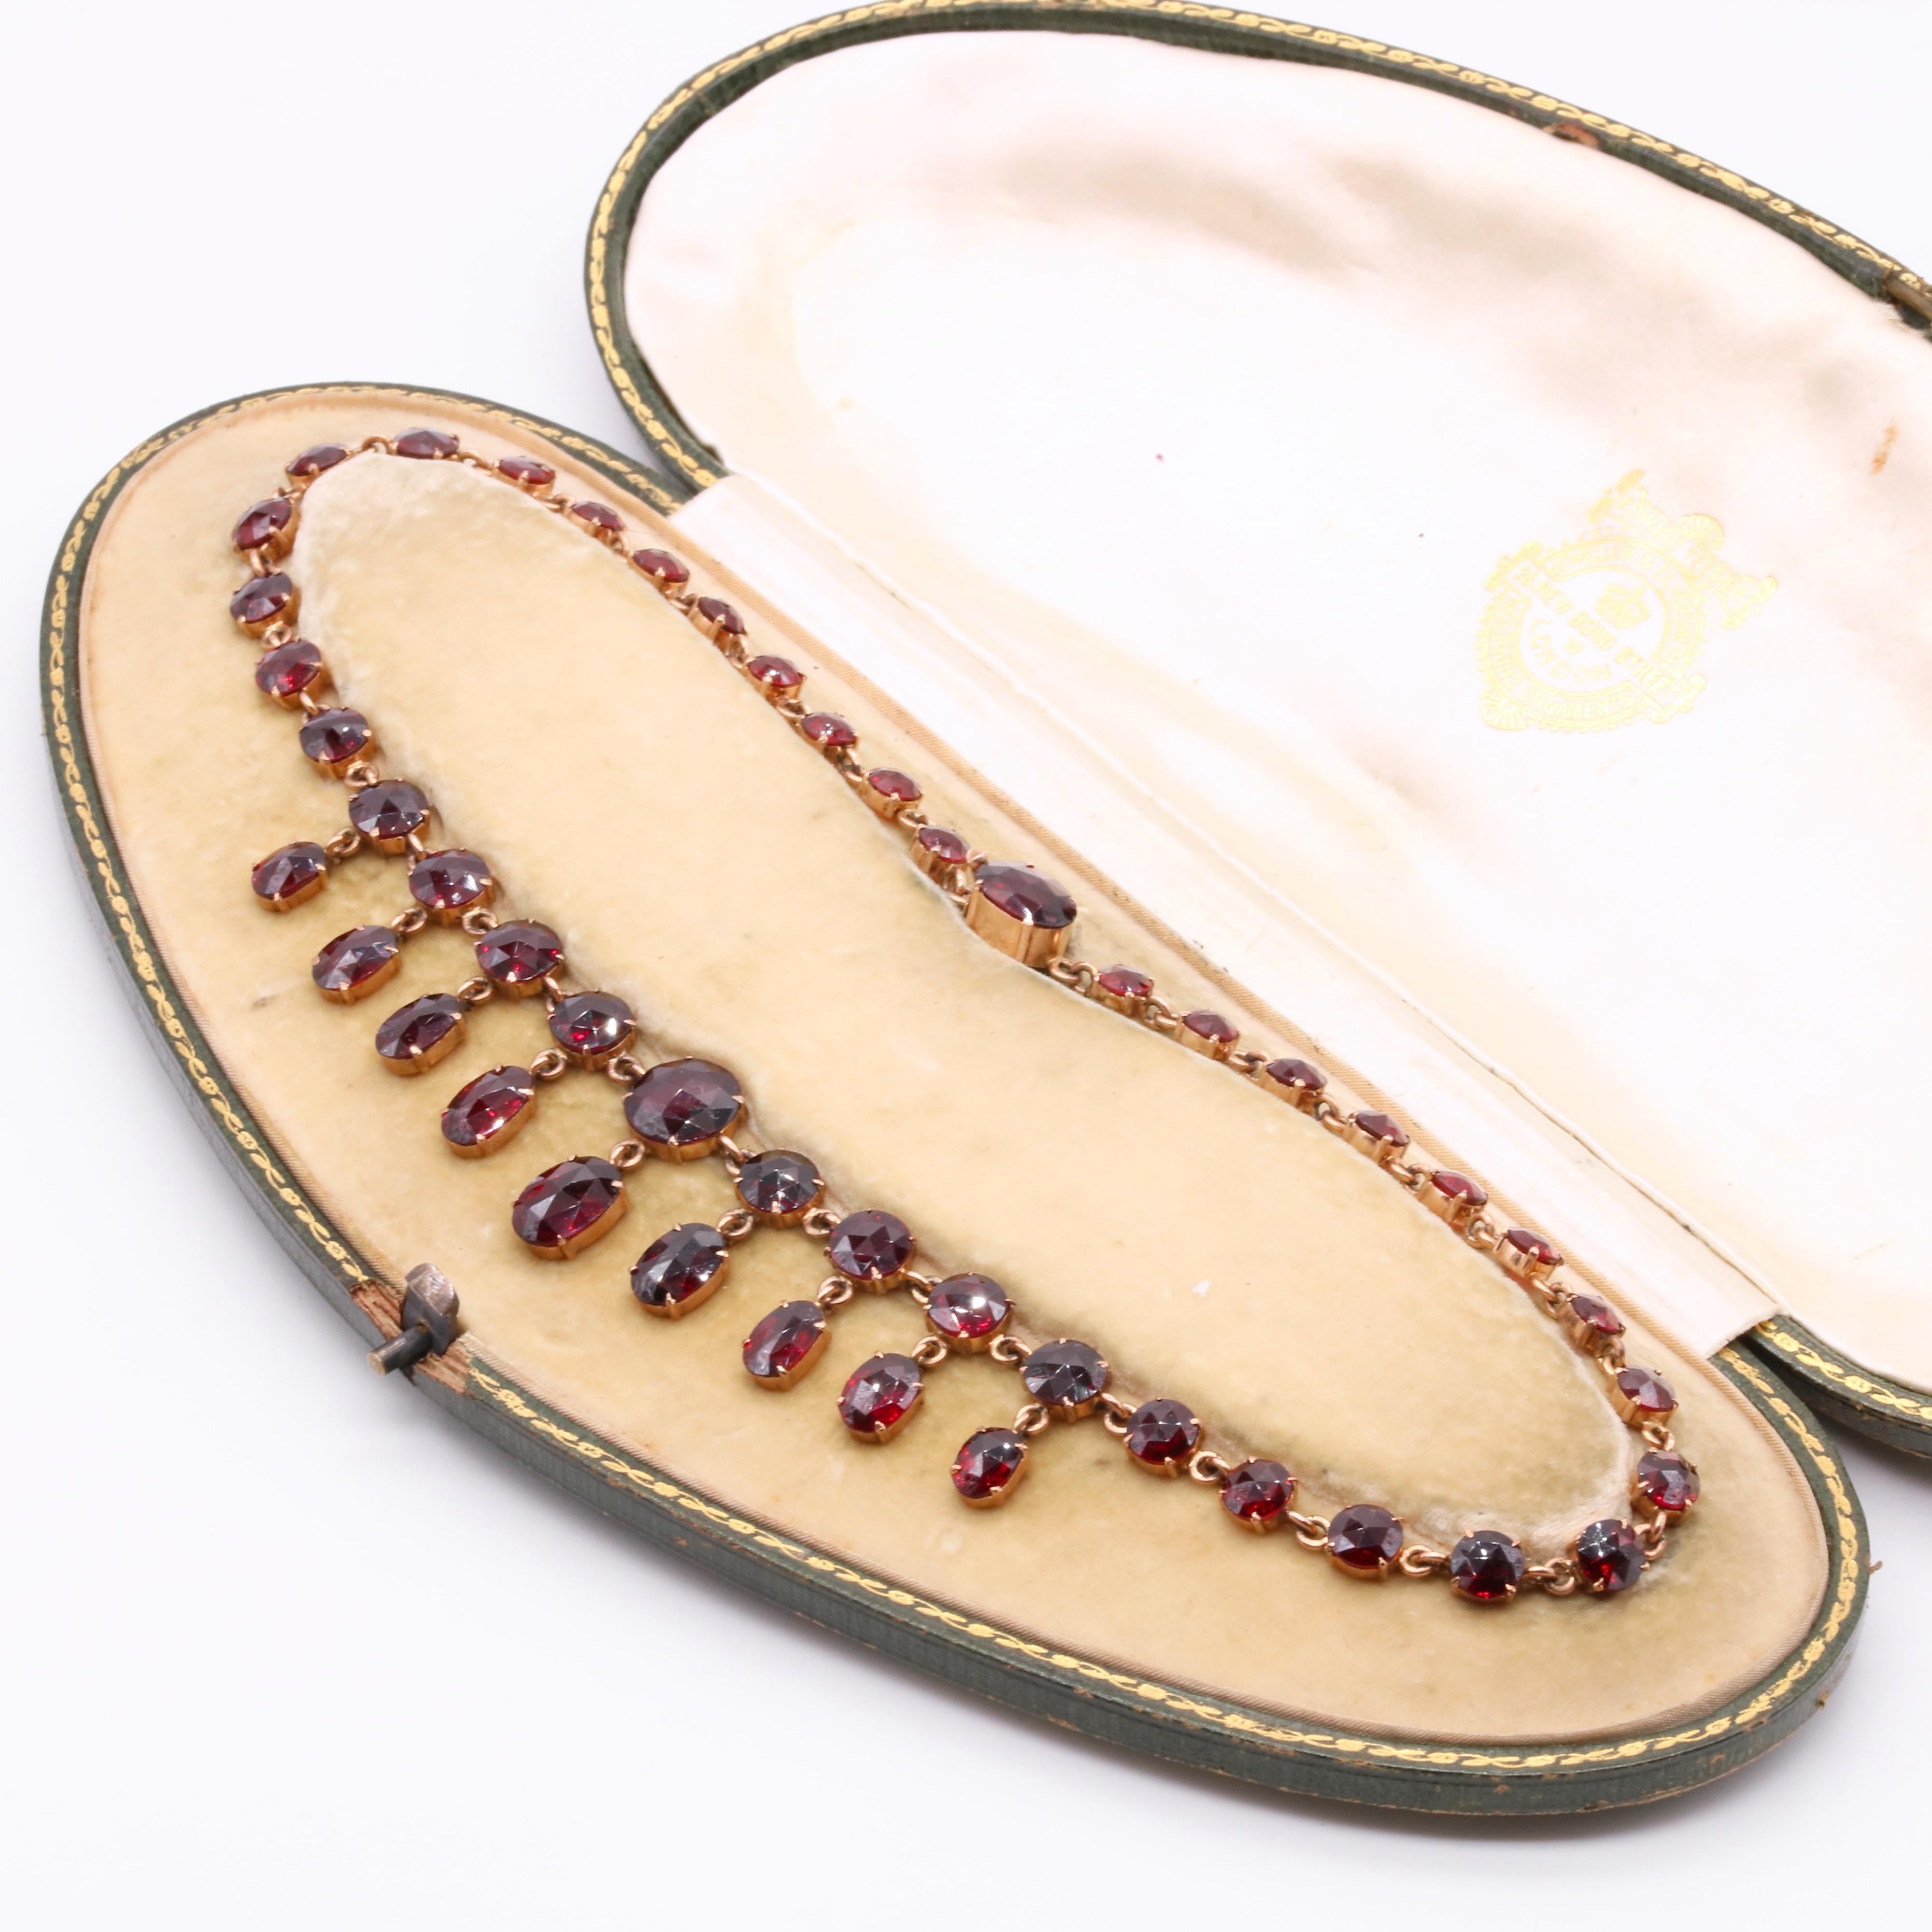 Antique Victorian 1870s Gold 48ctw Garnet Fringe Necklace in Original Fitted Box For Sale 6